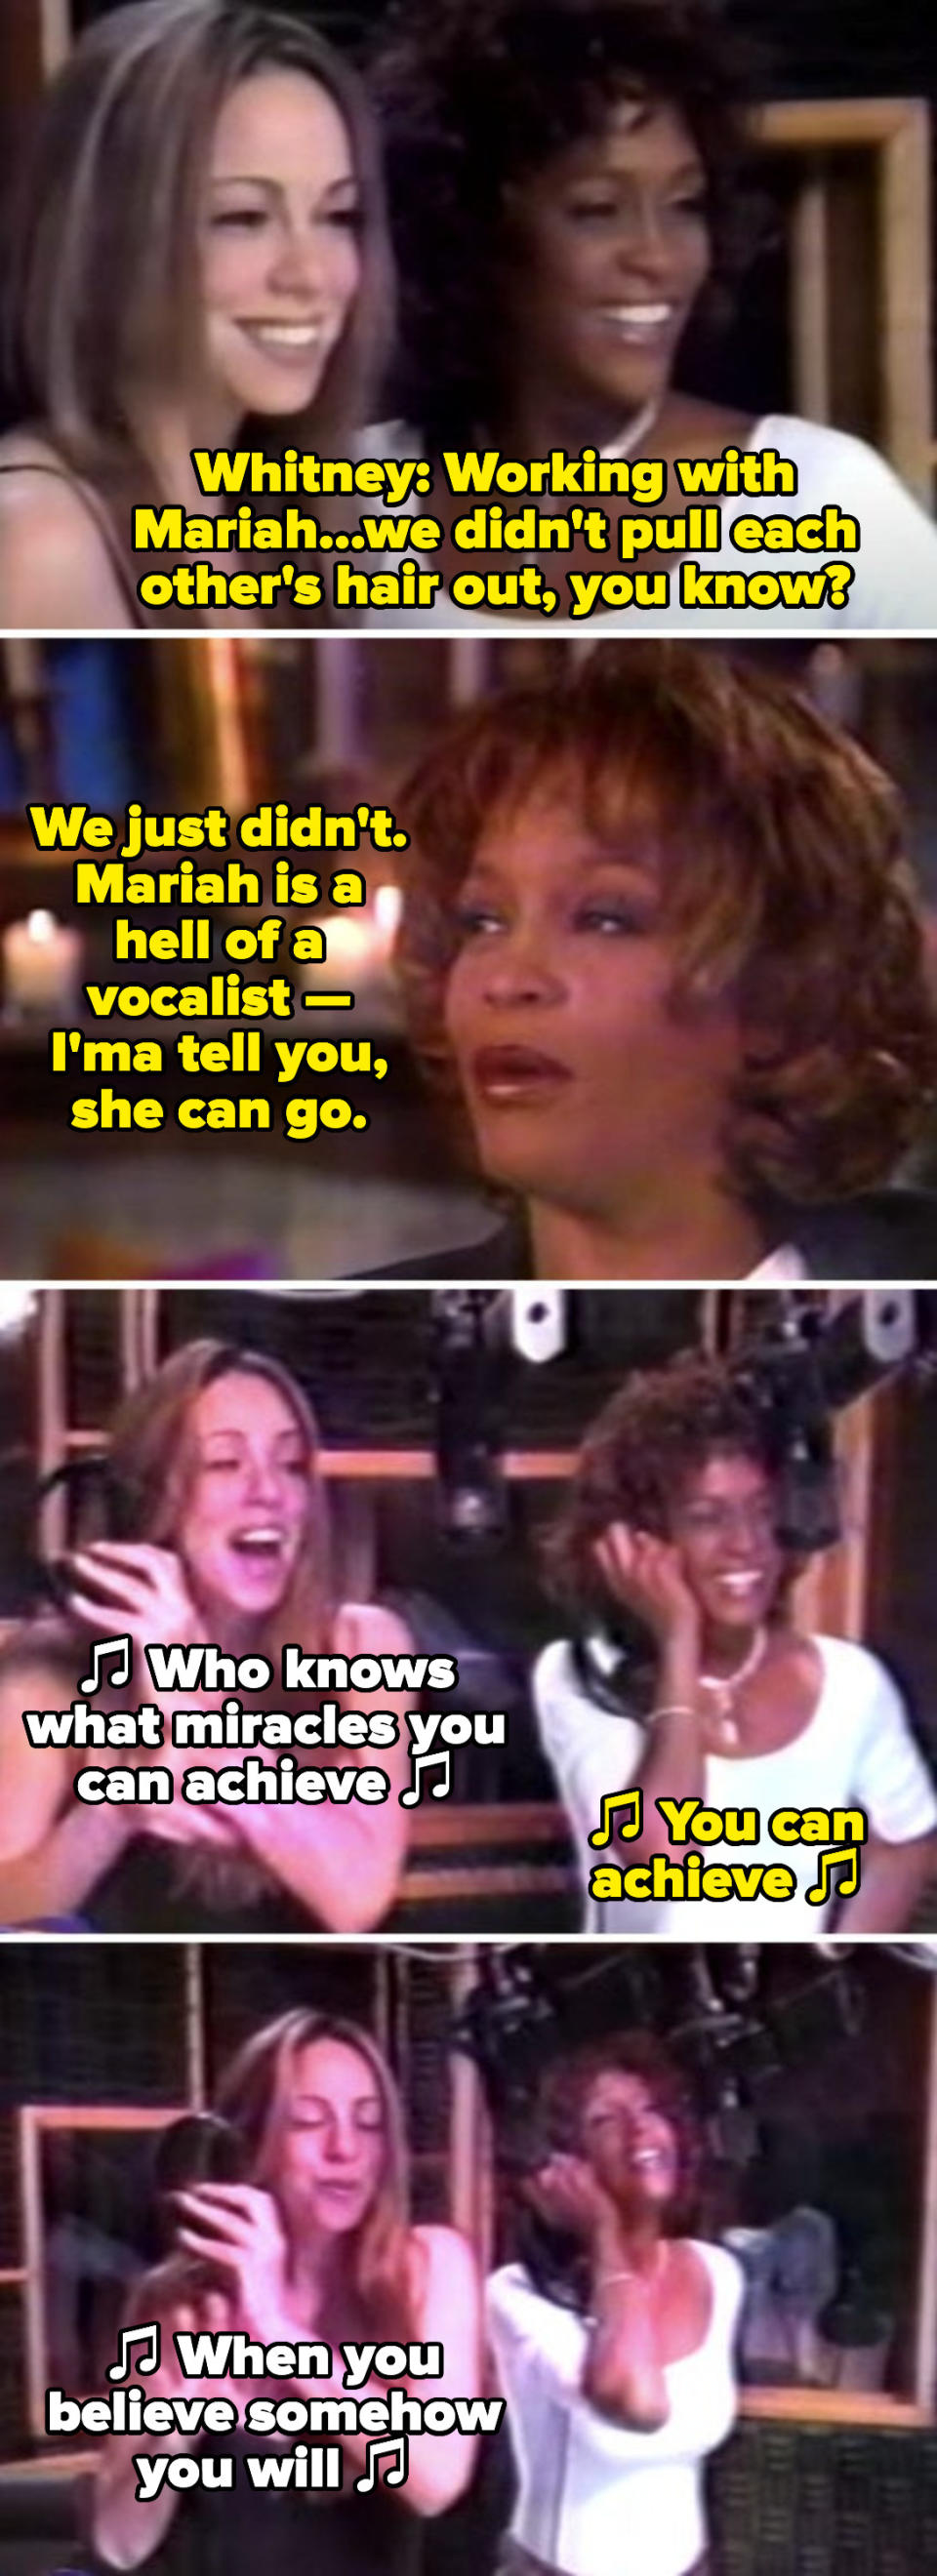 Carey and Houston behind the scenes in the studio recording "When You Believe," Houston saying: "Mariah is a hell of a vocalist — I'ma tell you, she can go"